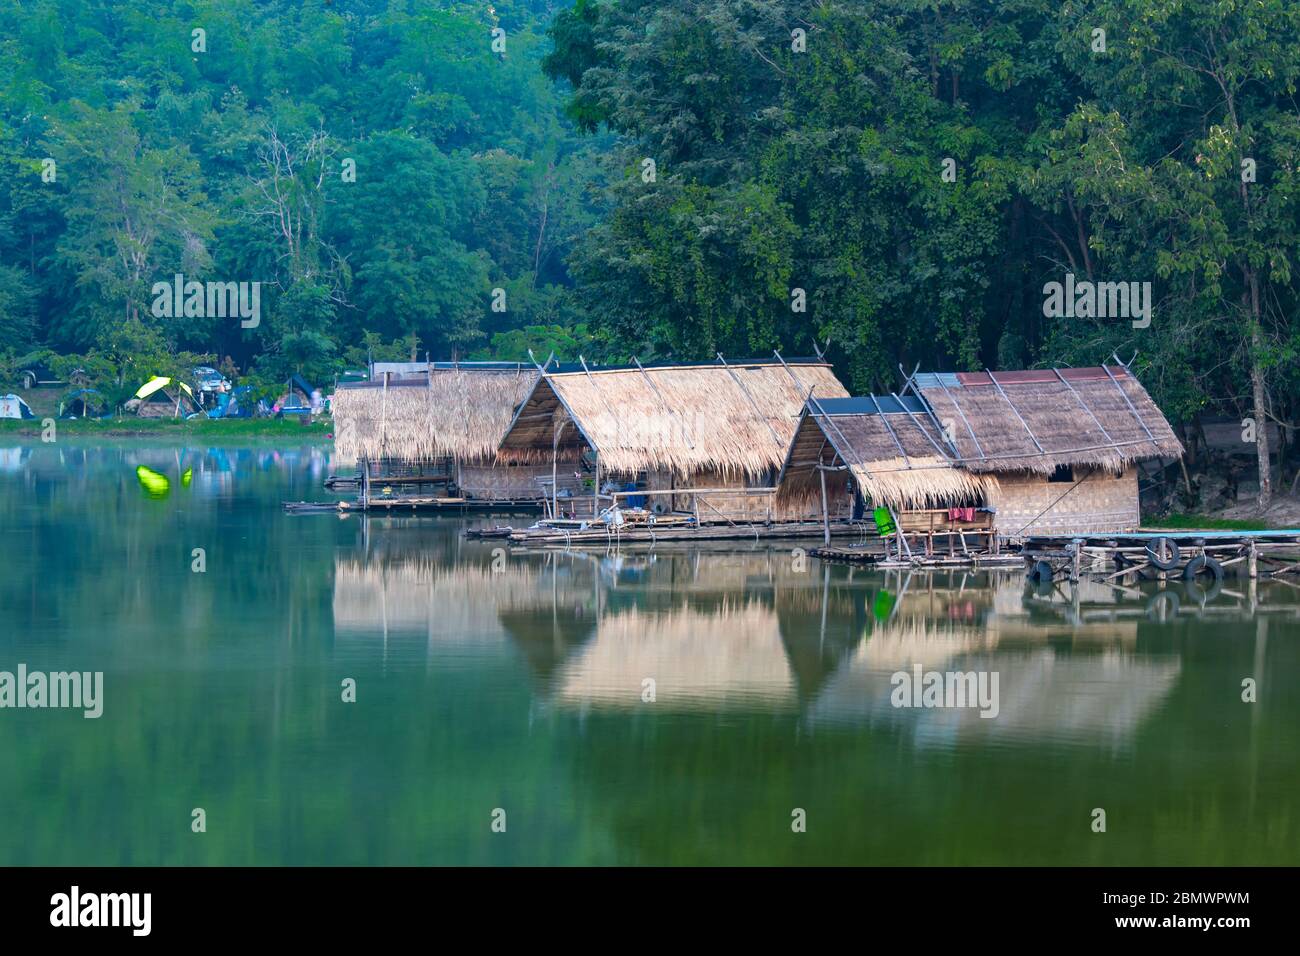 The wooden raft in the water reservoirs and mountain views. Stock Photo